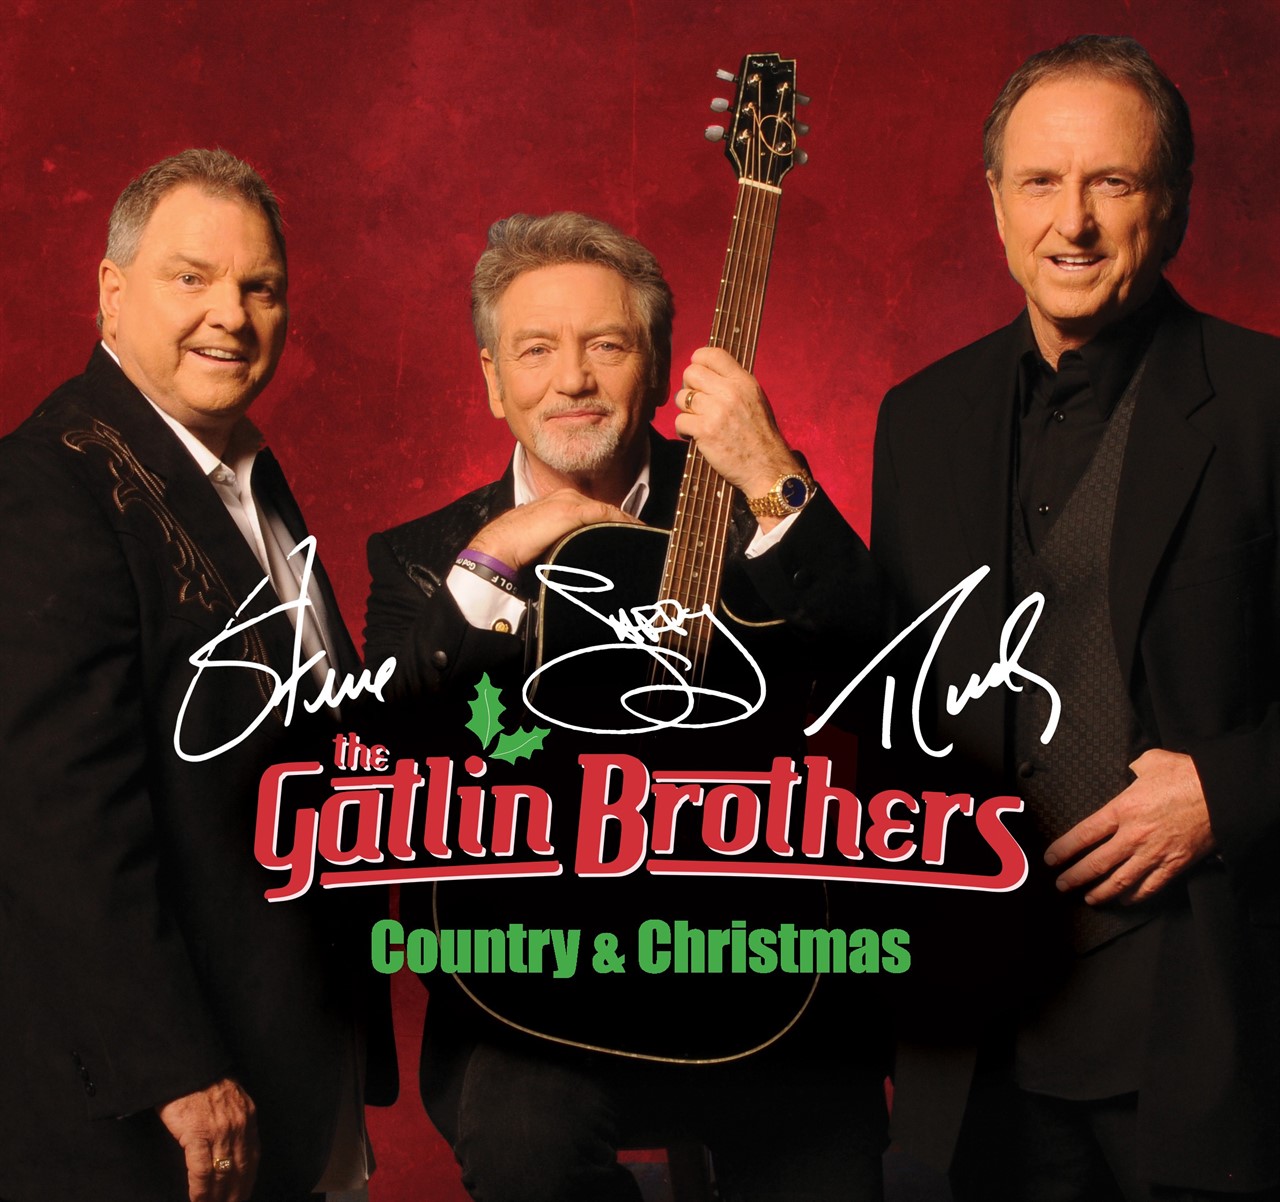 Franklin Theatre The Gatlin Brothers Country & Christmas